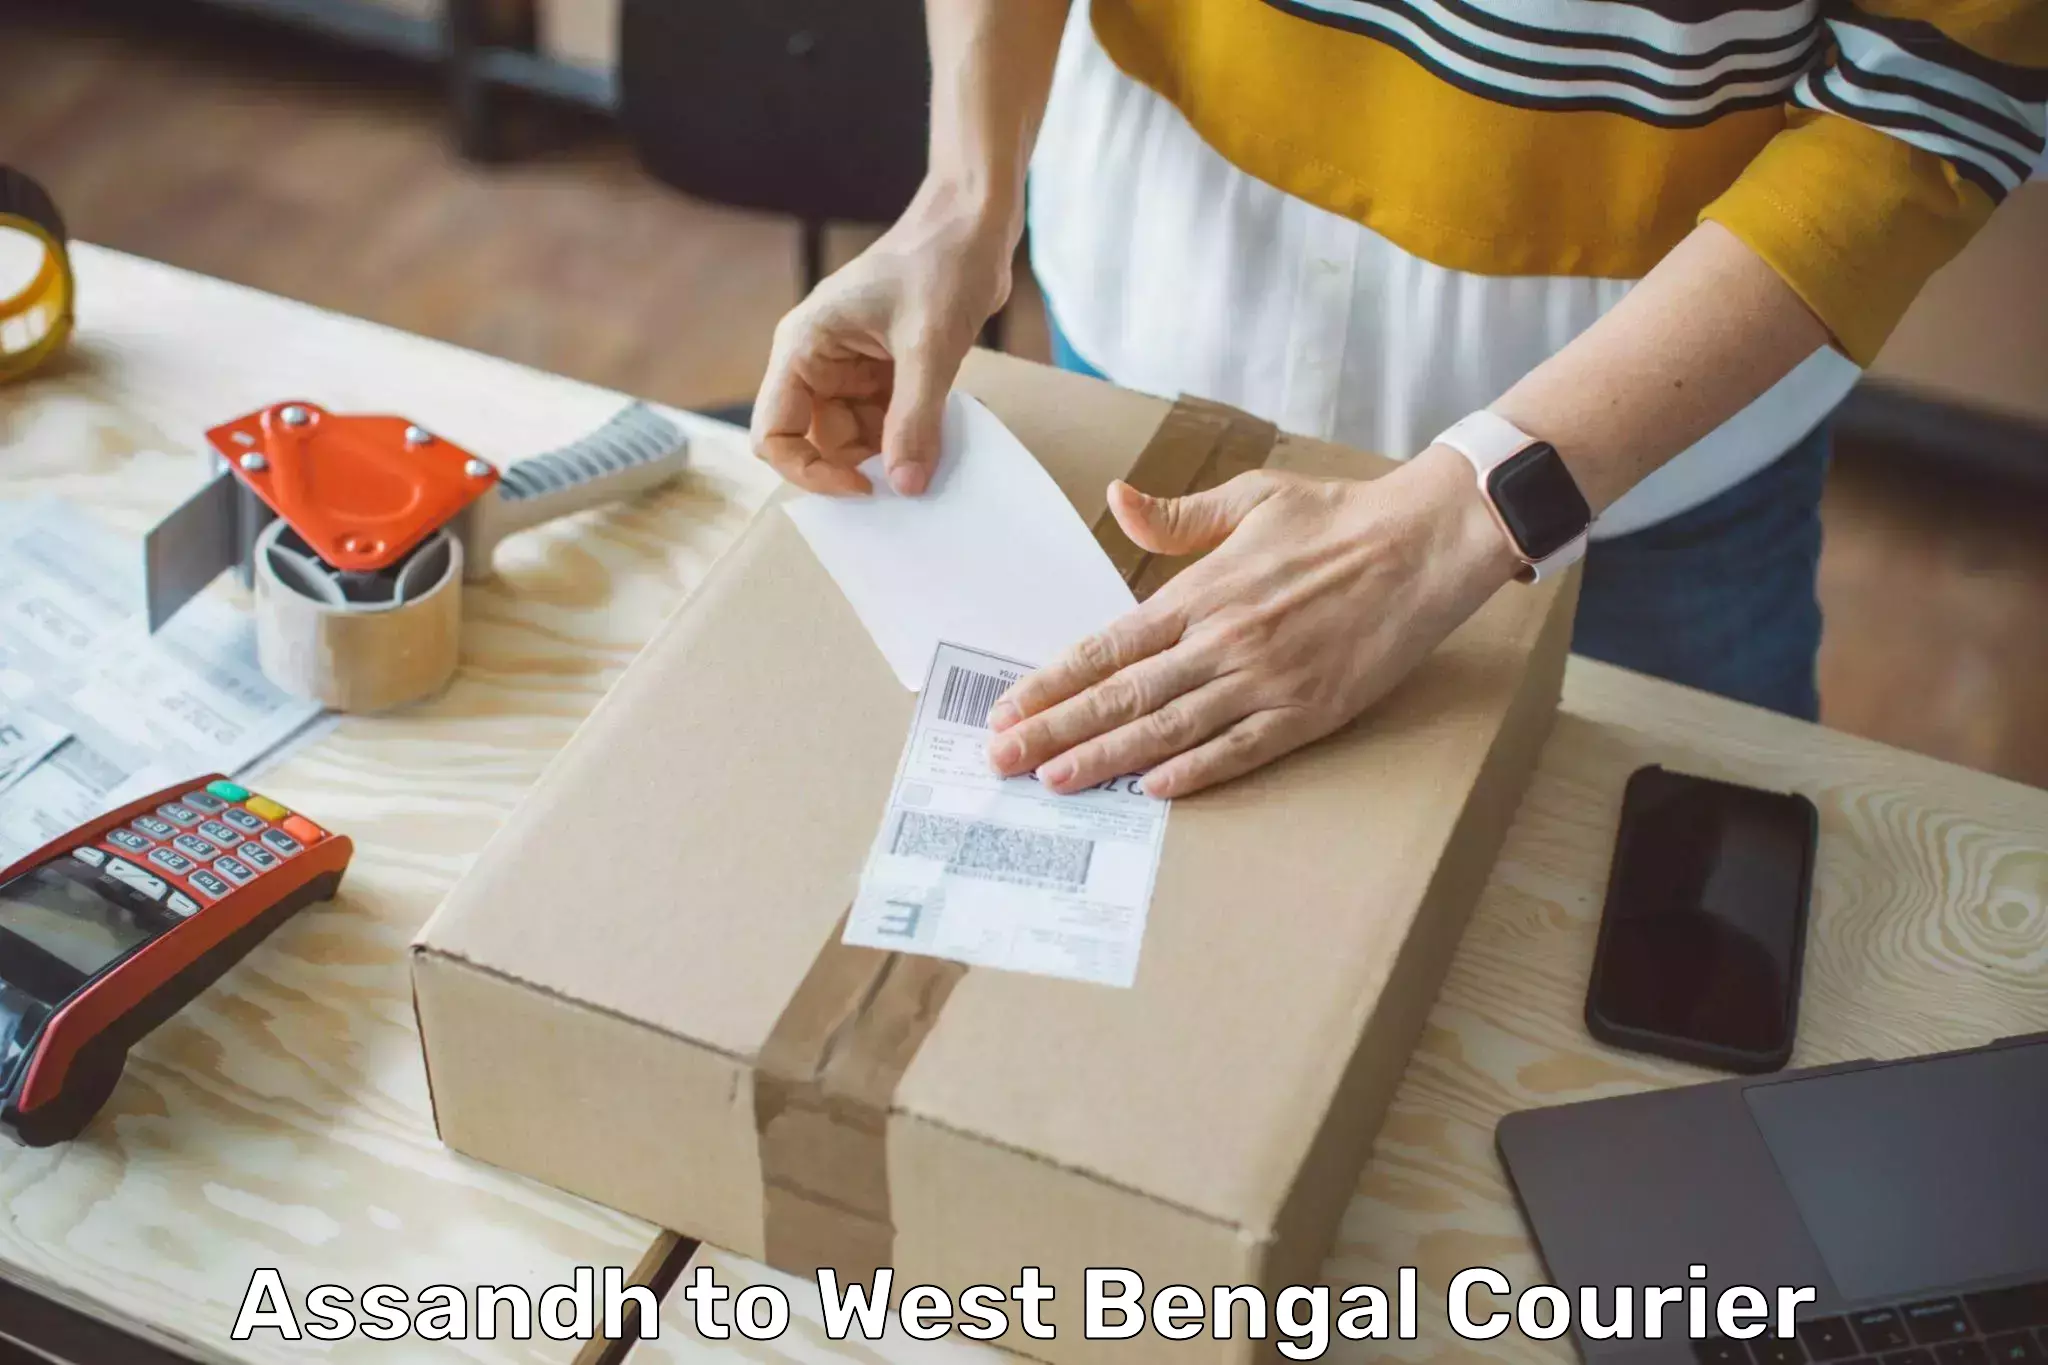 Bulk courier orders Assandh to West Bengal